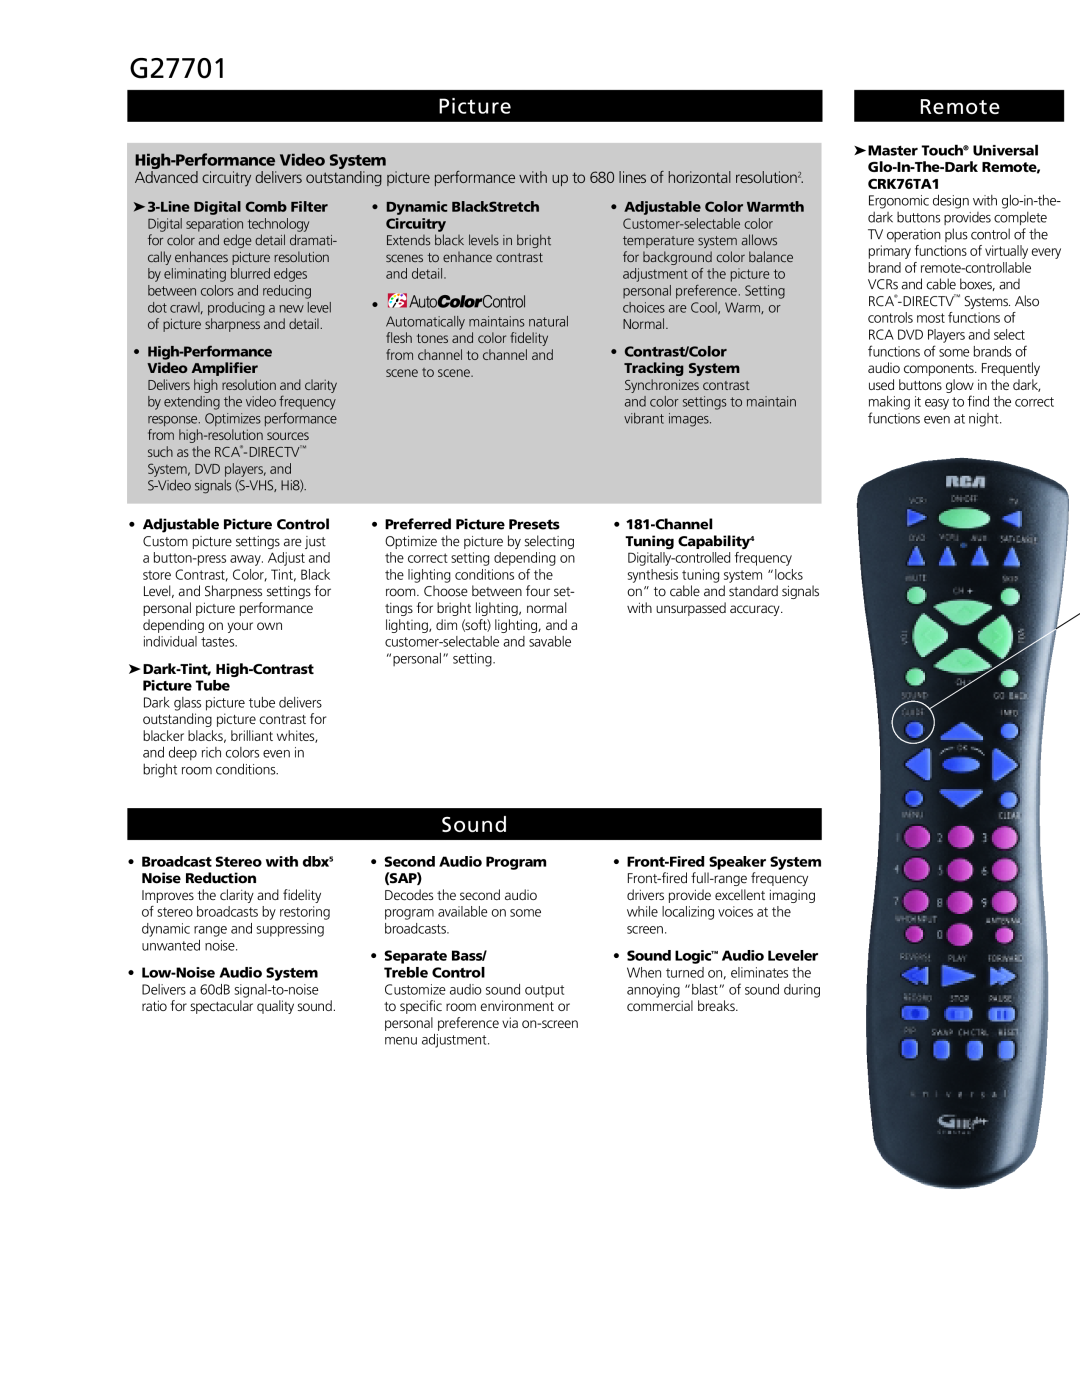 RCA G27701 manual Picture, Remote, Sound, High-Performance Video System 